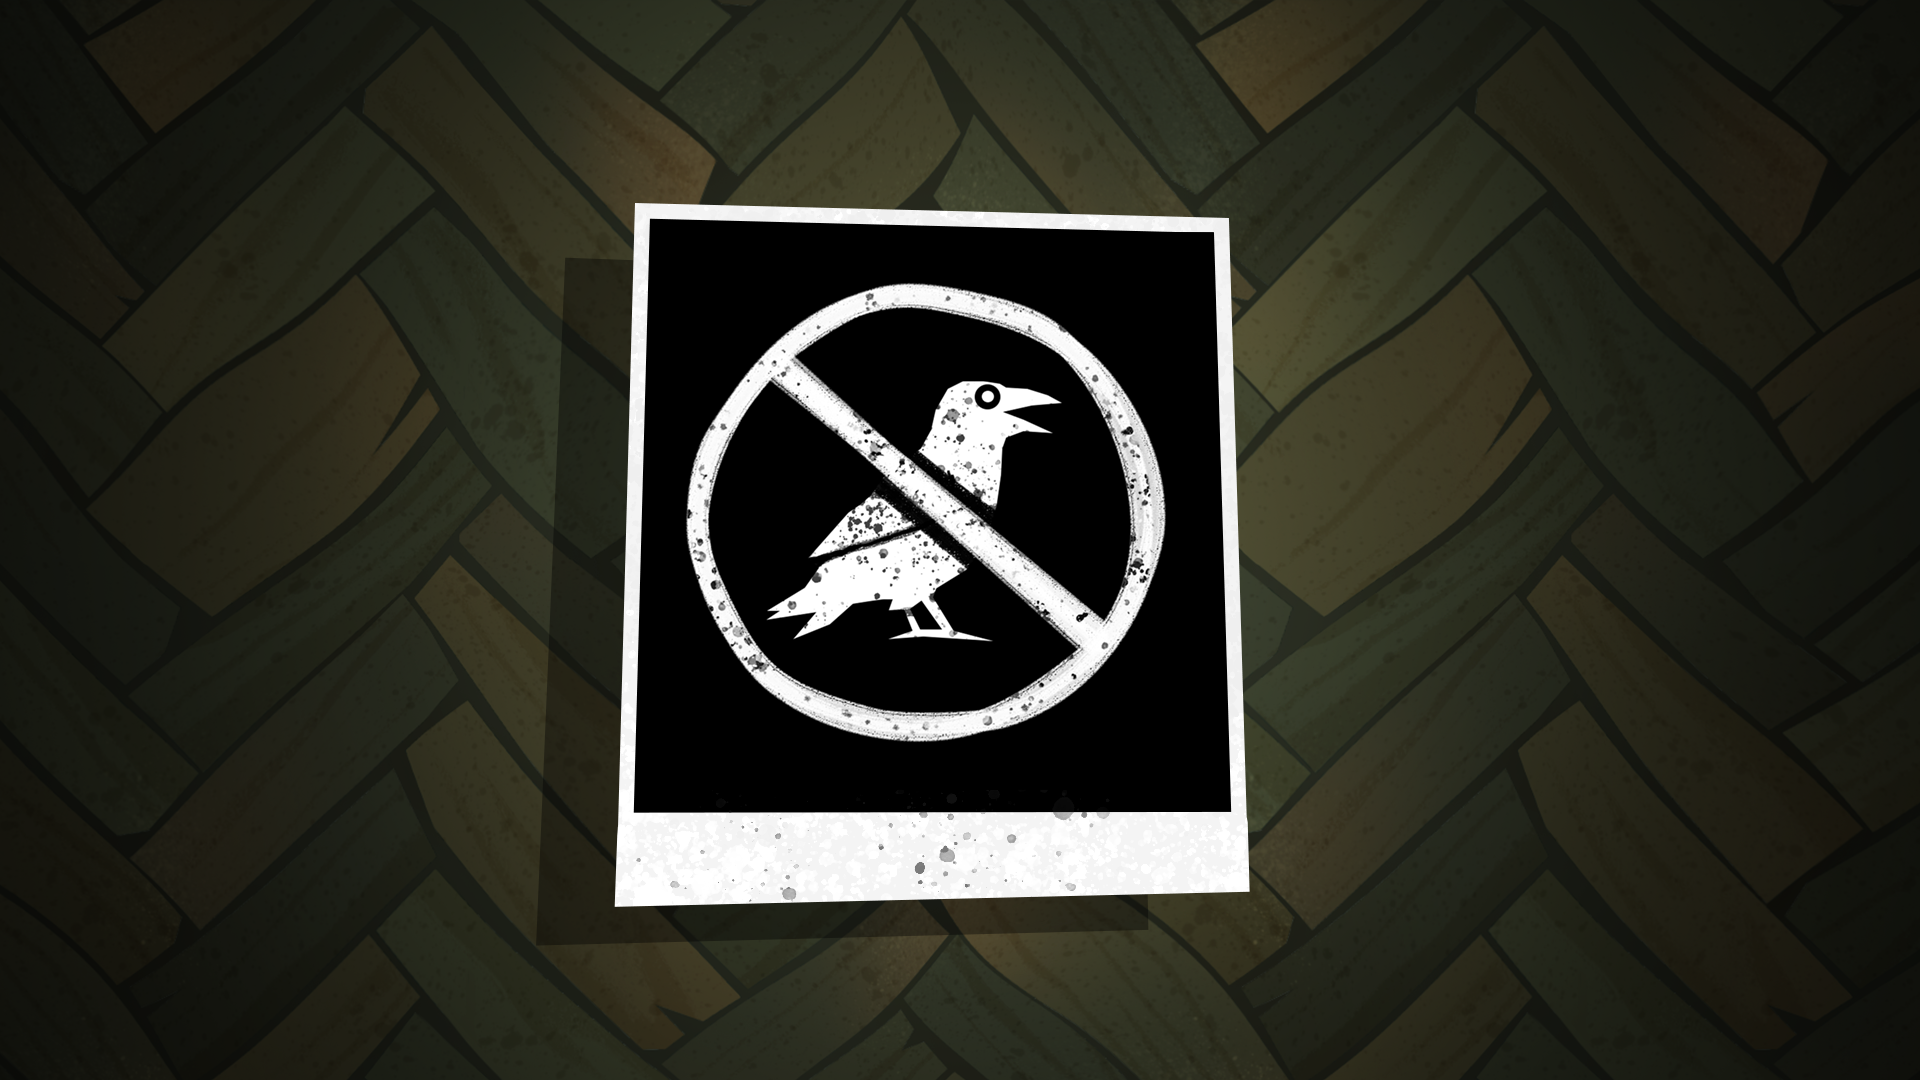 No Crows Allowed